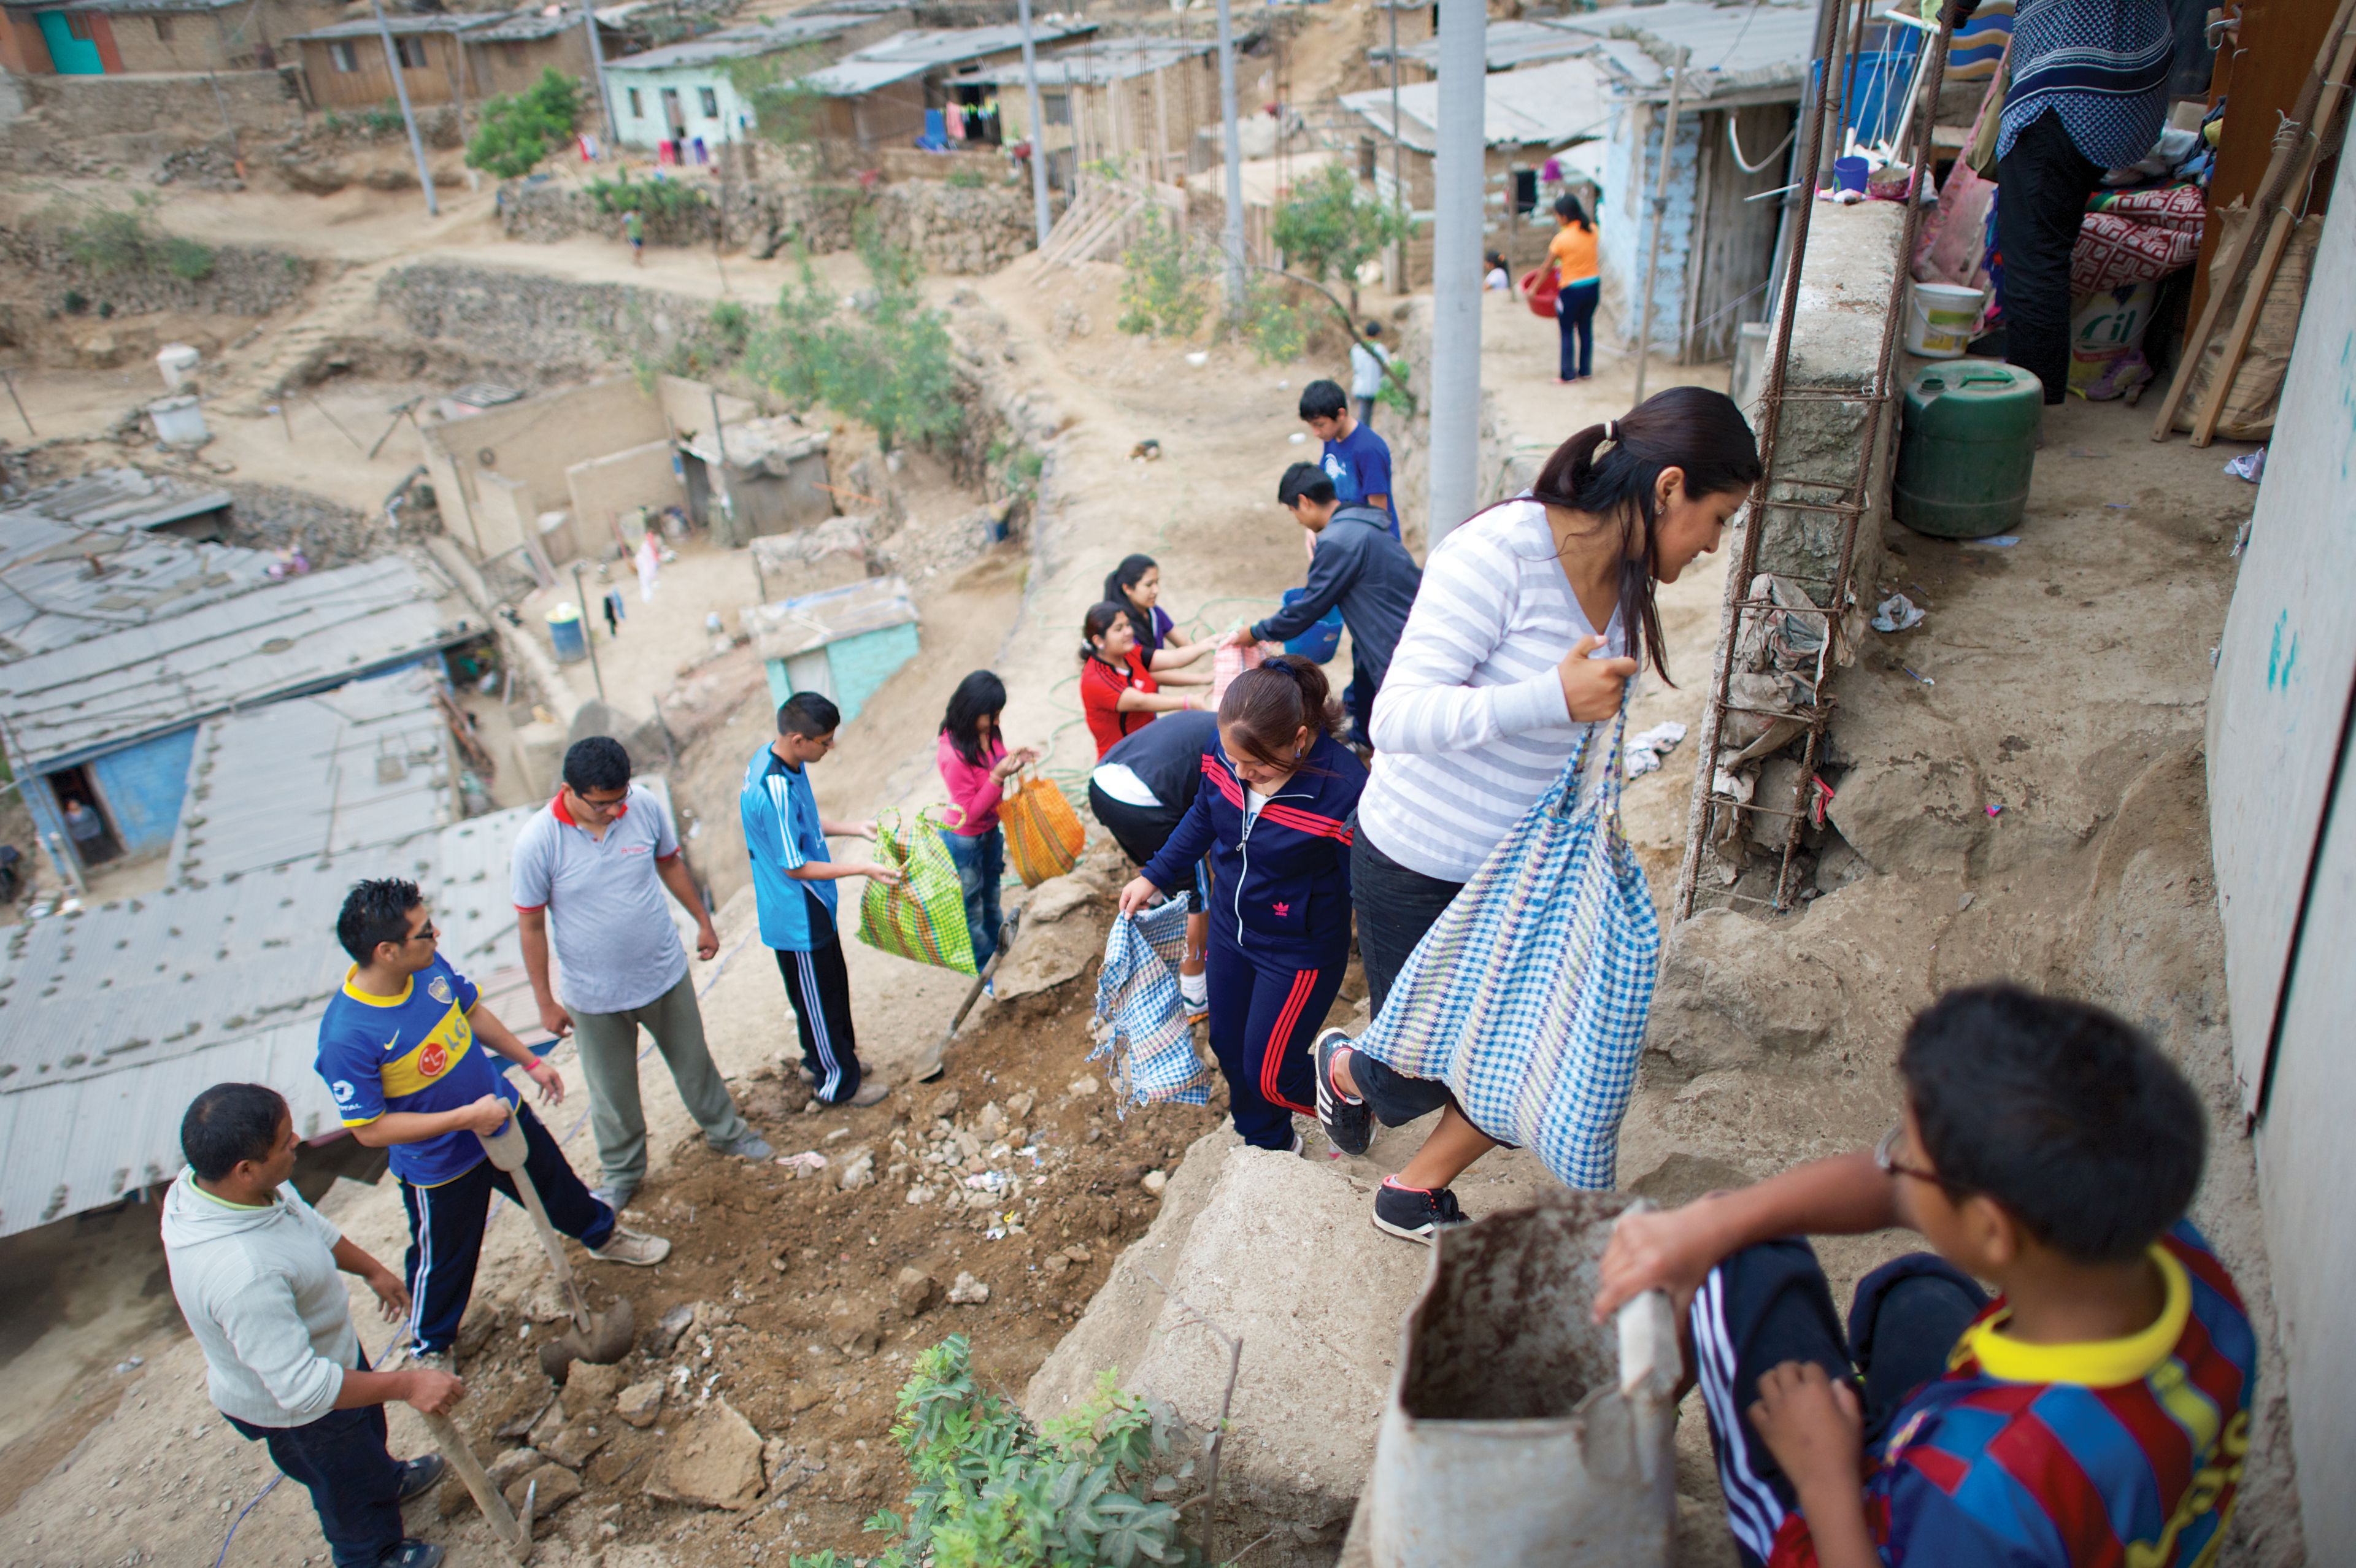 Youth help with a service project in Peru.